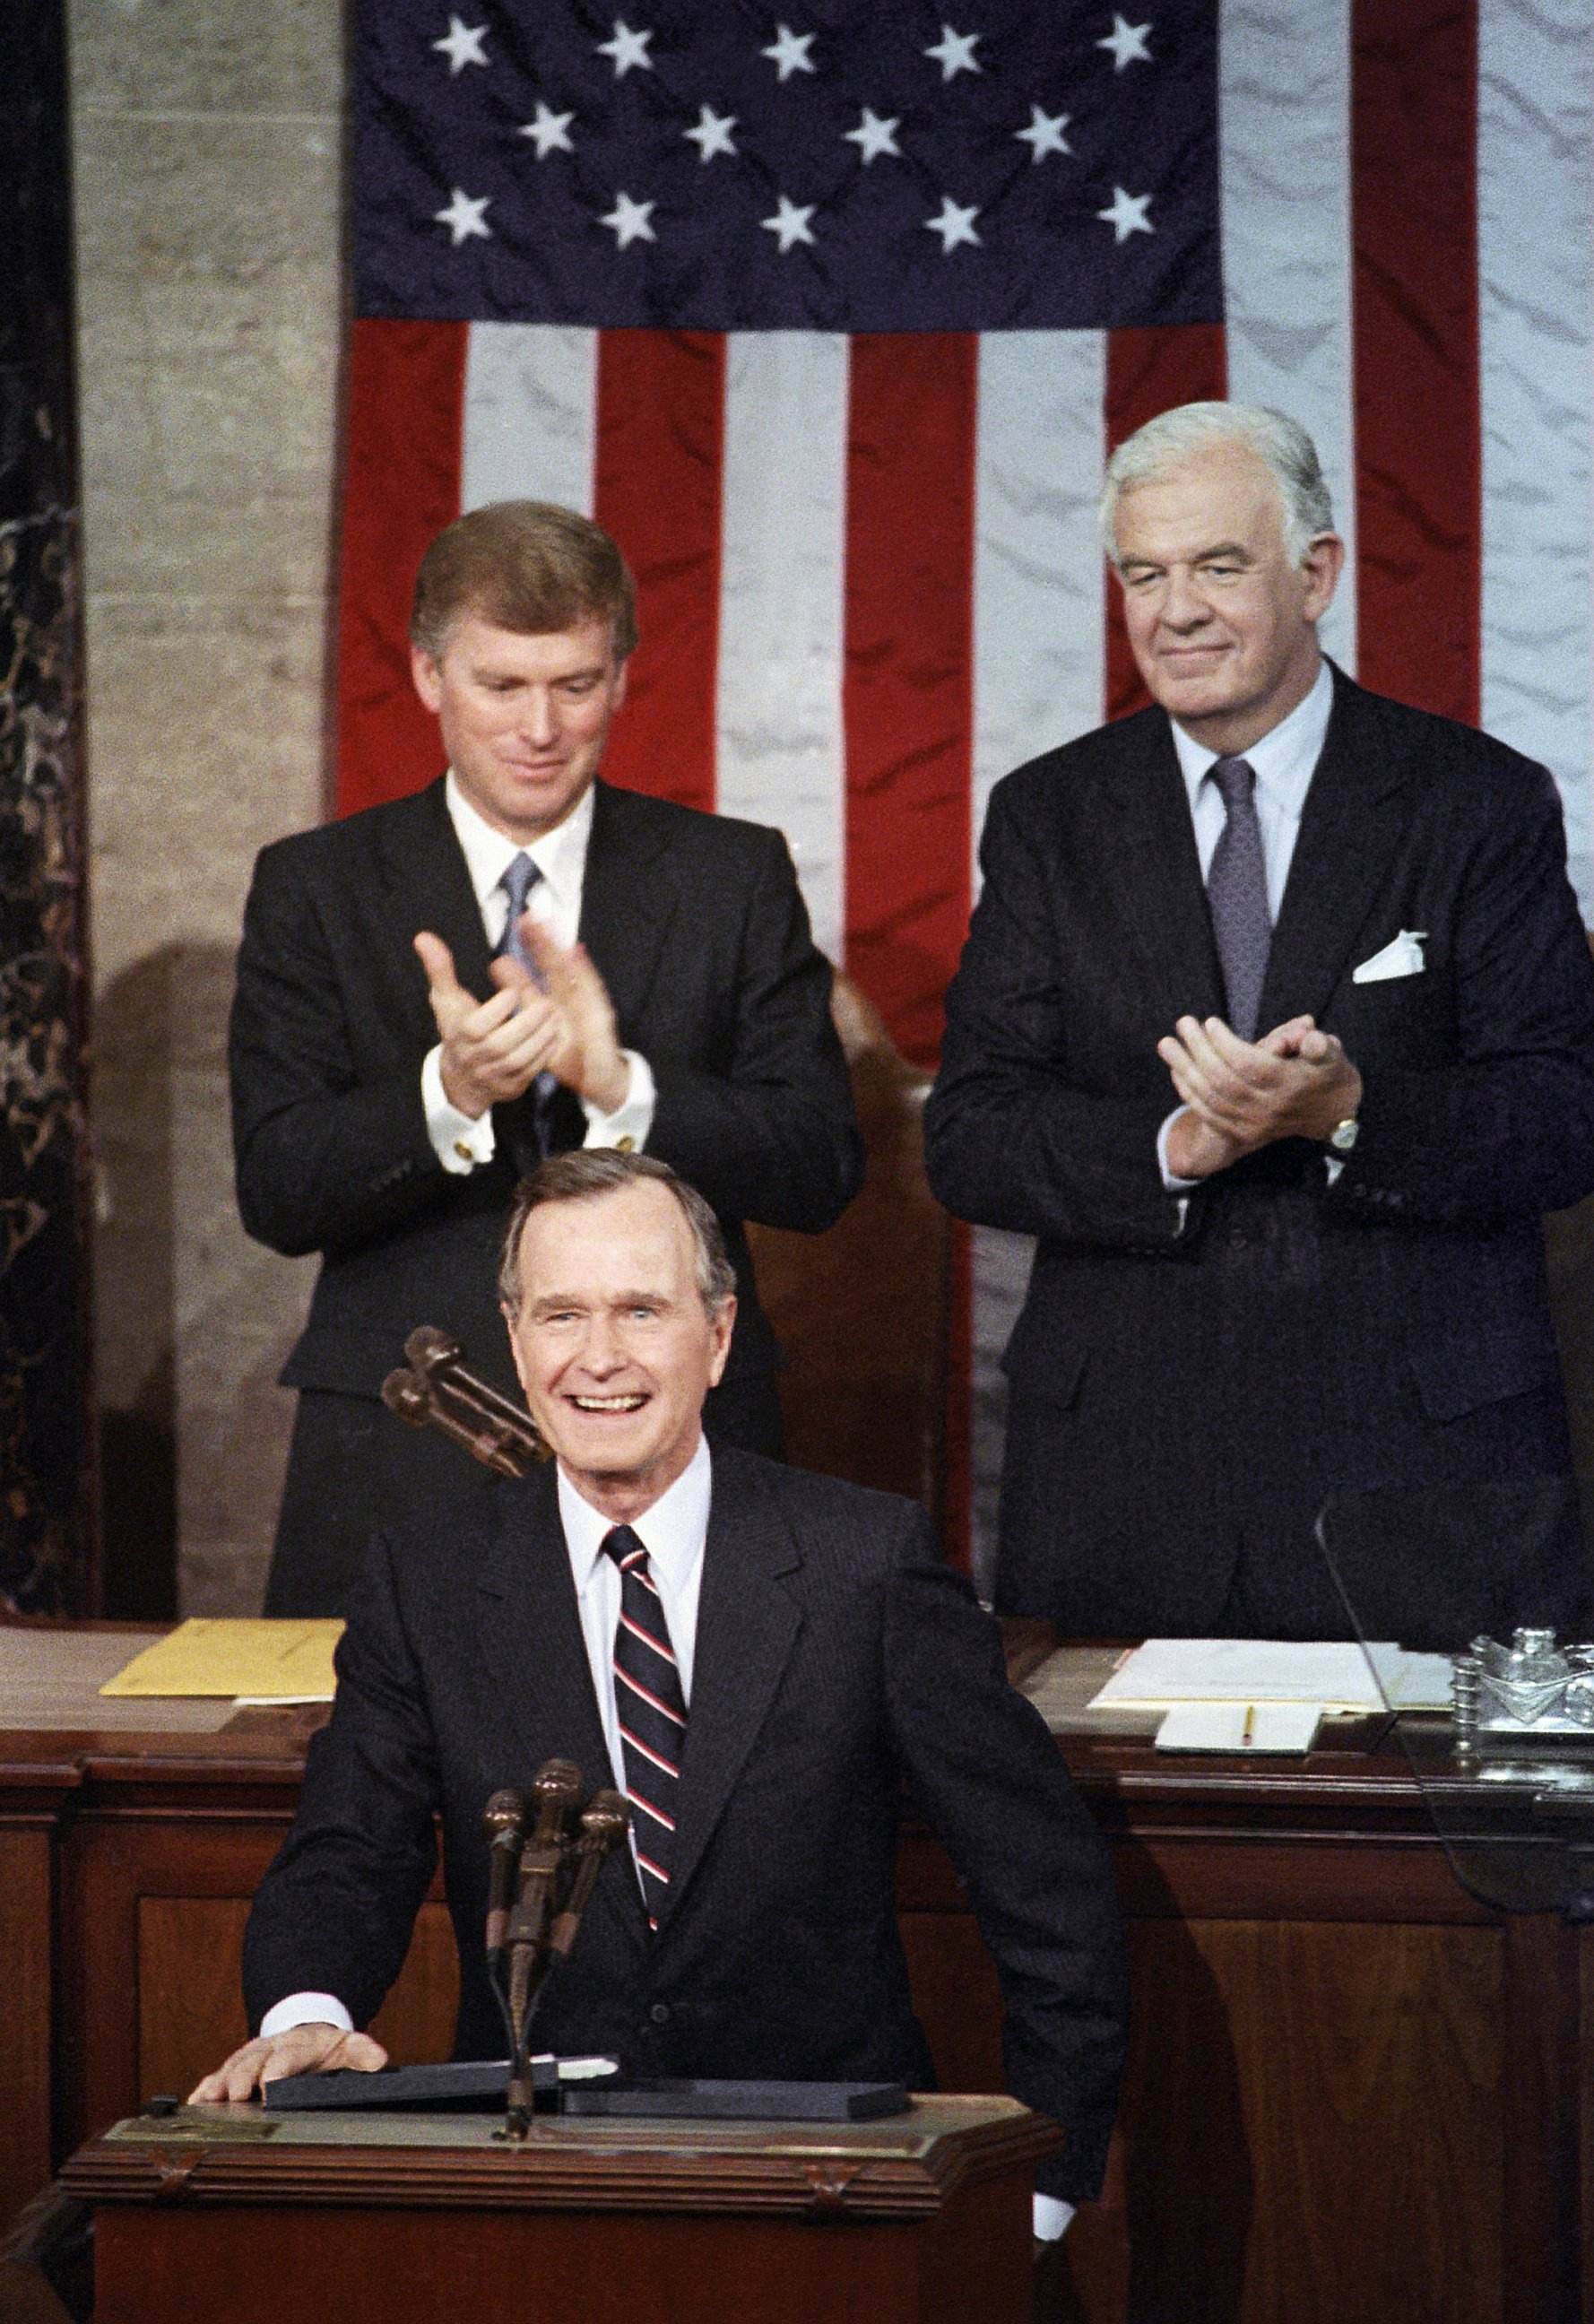 PHOTO: In this Jan. 31, 1990, file photo, President George H.W. Bush receives applause prior to delivering his first State of the Union address on Capitol Hill in Washington.